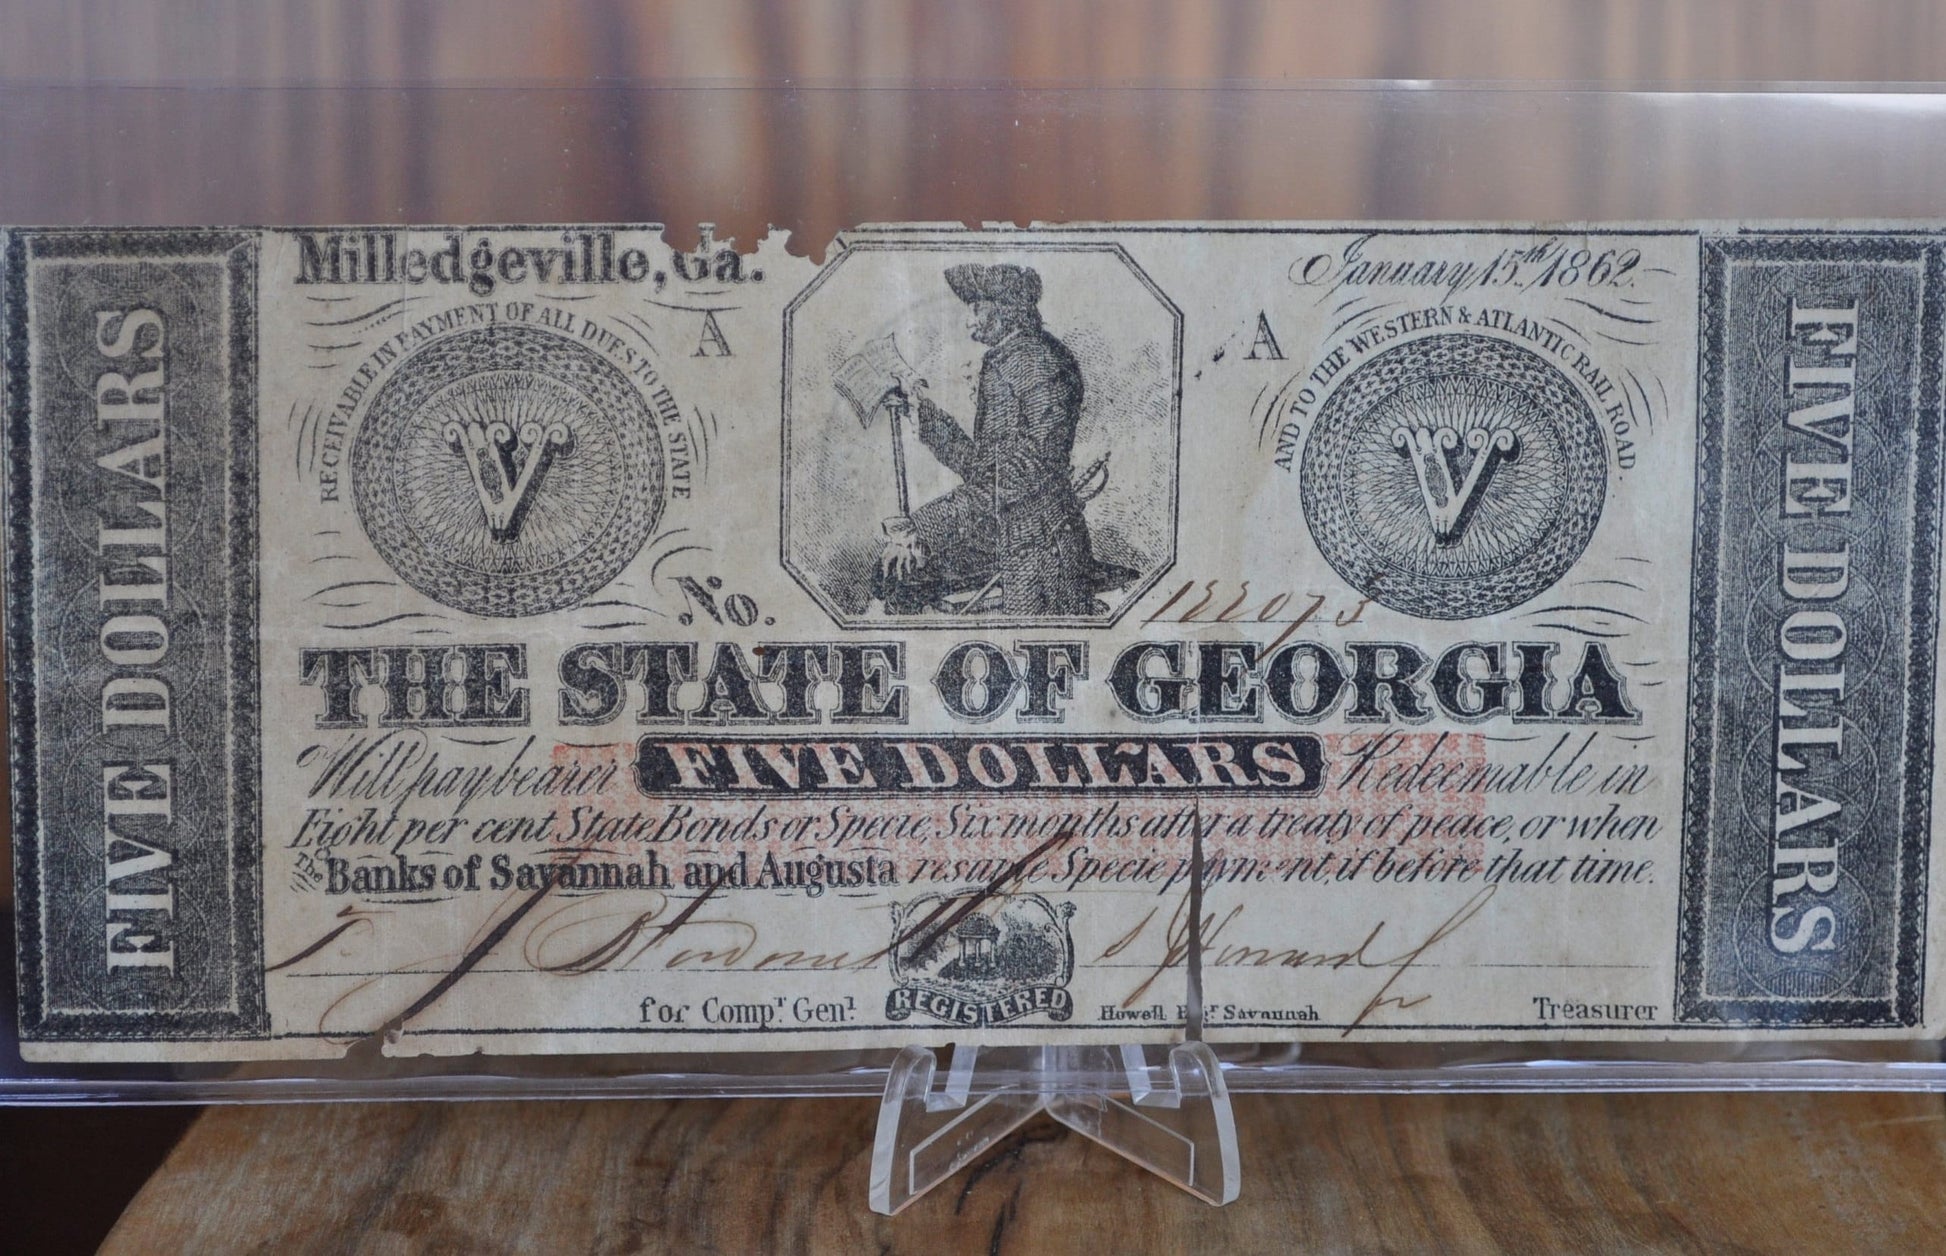 1862 The State of Georgia 5 Dollar Paper Banknote - VG Condition, one split - Rarer Find, Obsolete Currency - Five Dollar Bill 1862 Georgia